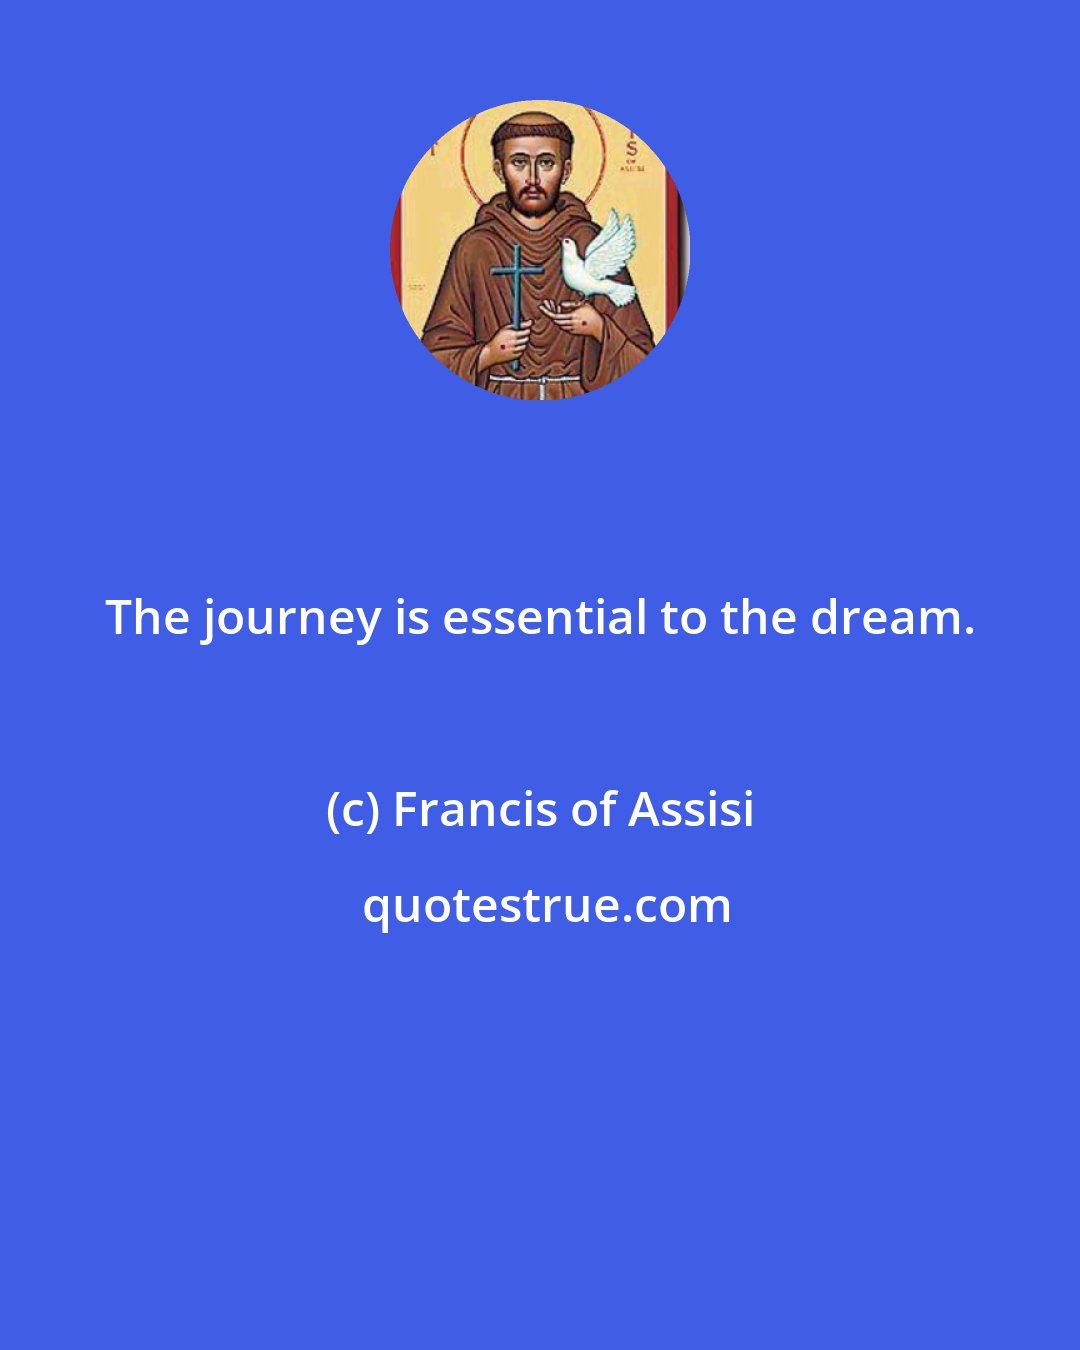 Francis of Assisi: The journey is essential to the dream.